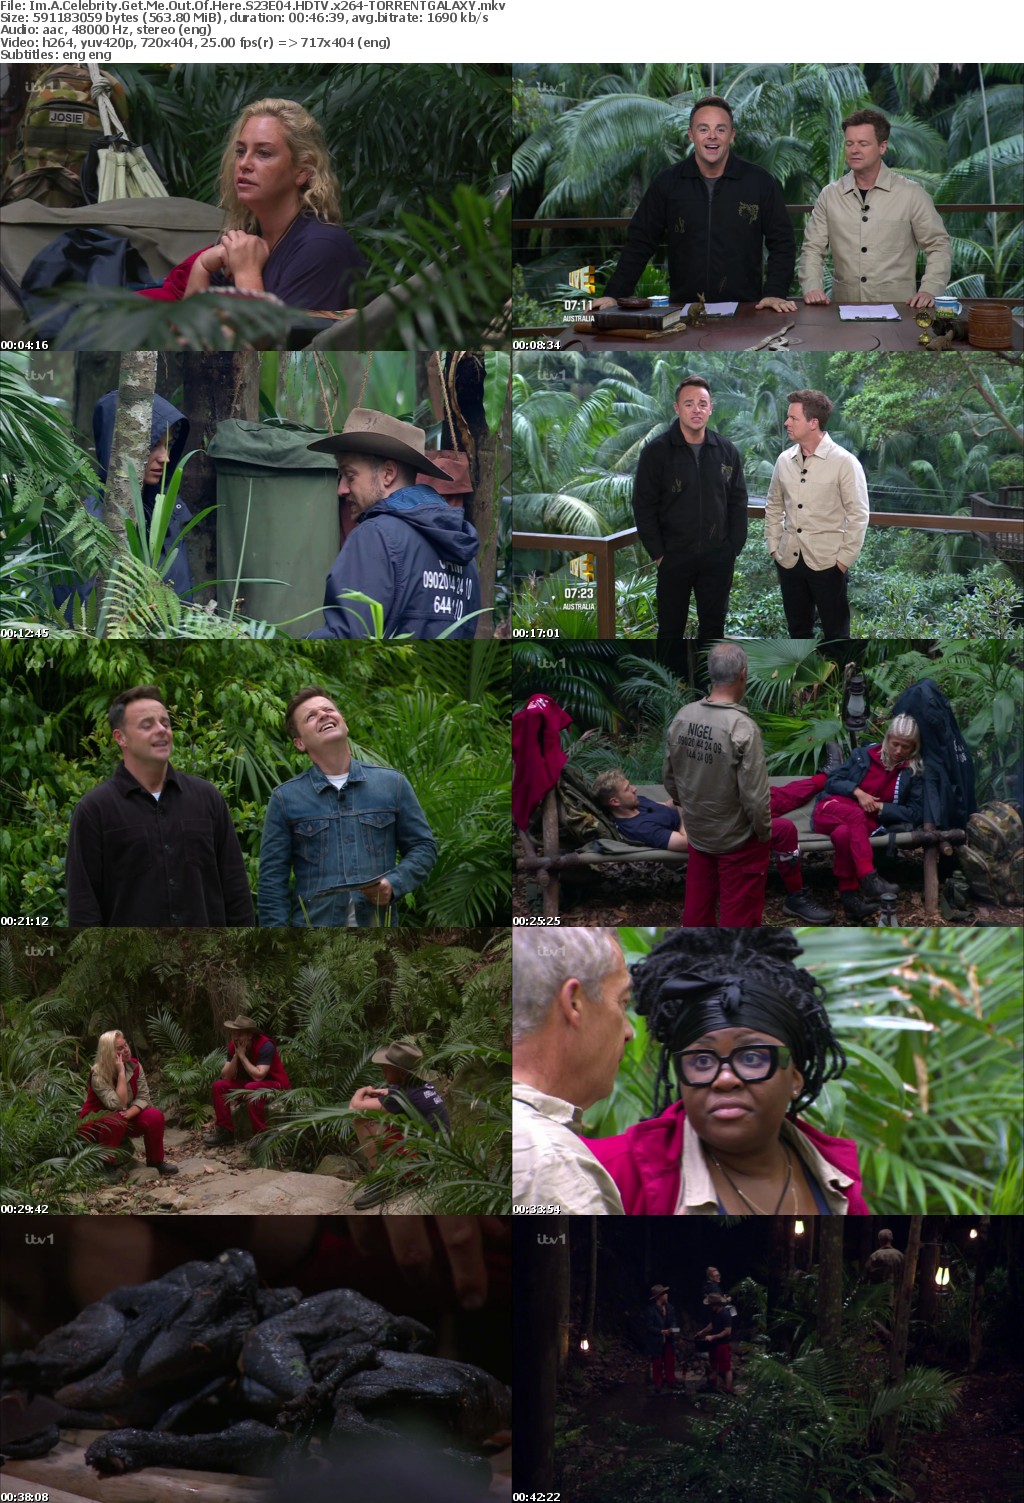 Im A Celebrity Get Me Out Of Here S23E04 HDTV x264-GALAXY